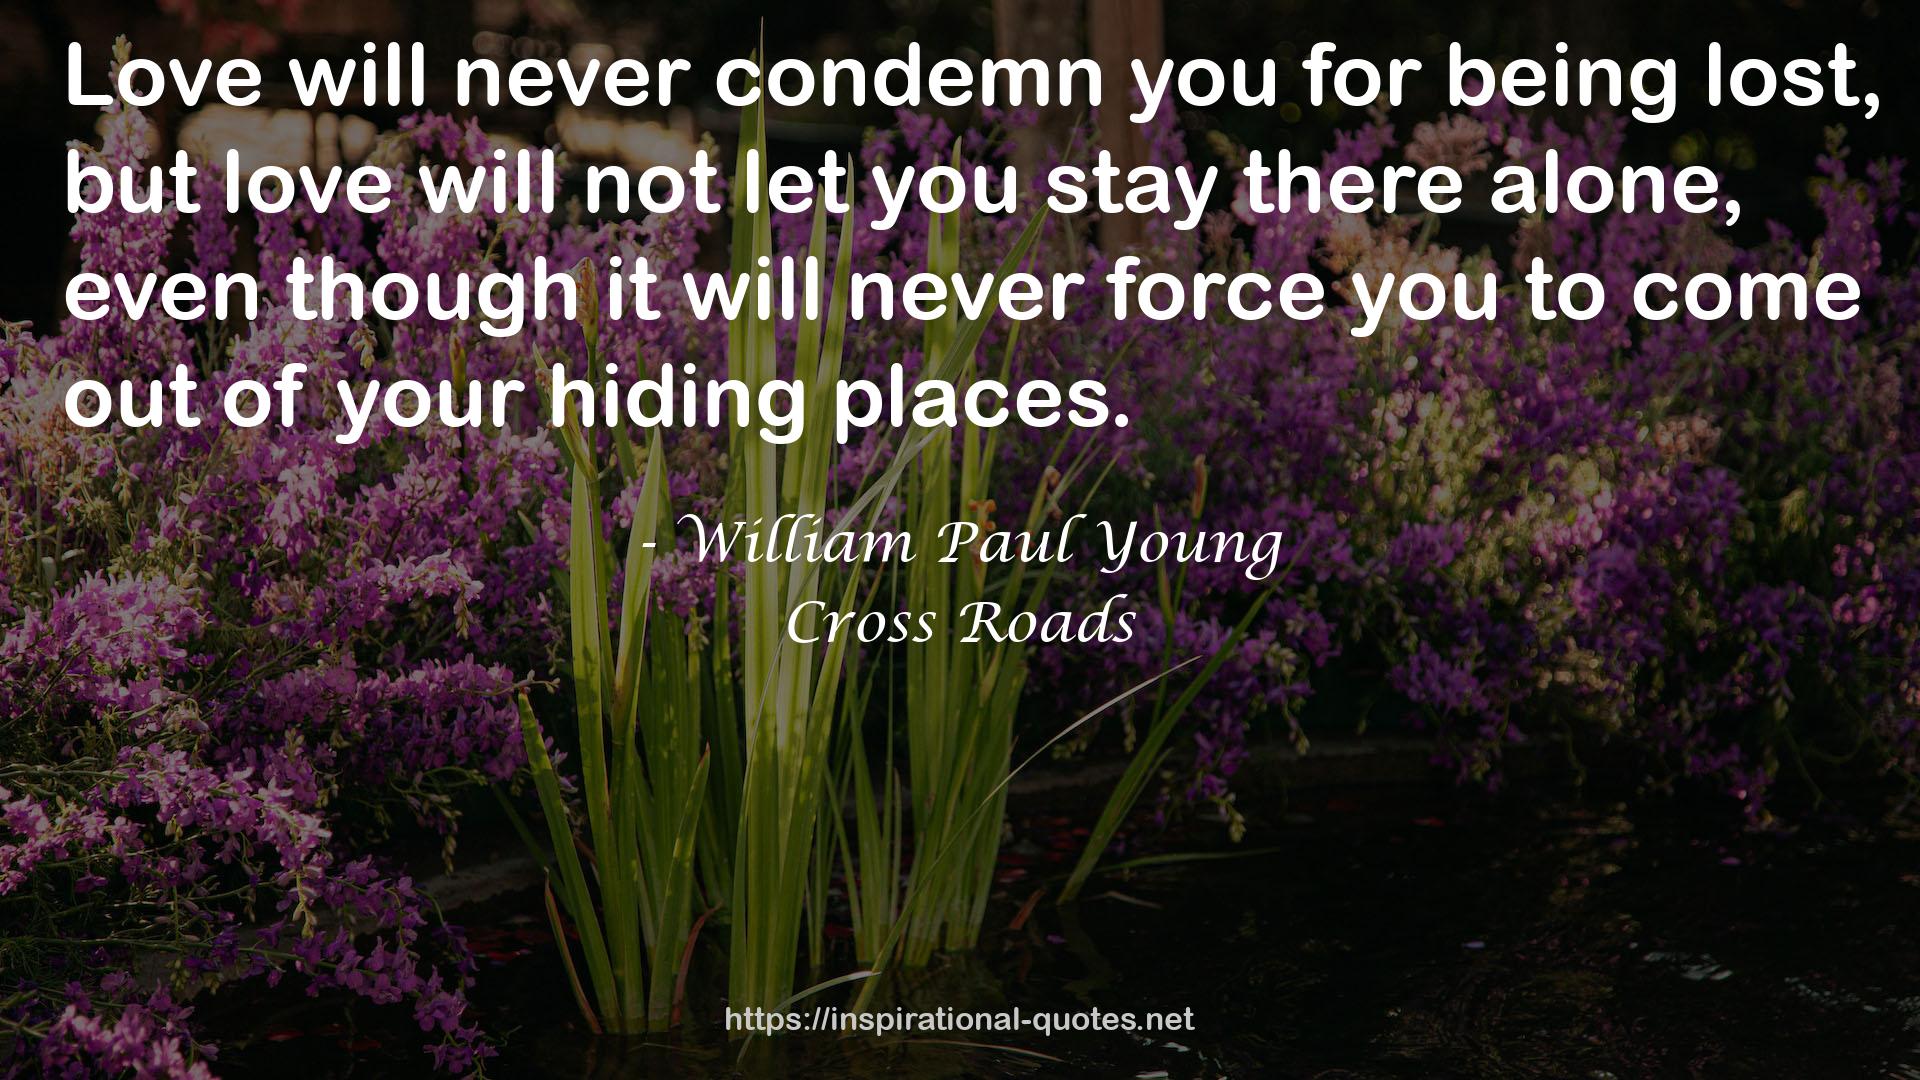 William Paul Young QUOTES